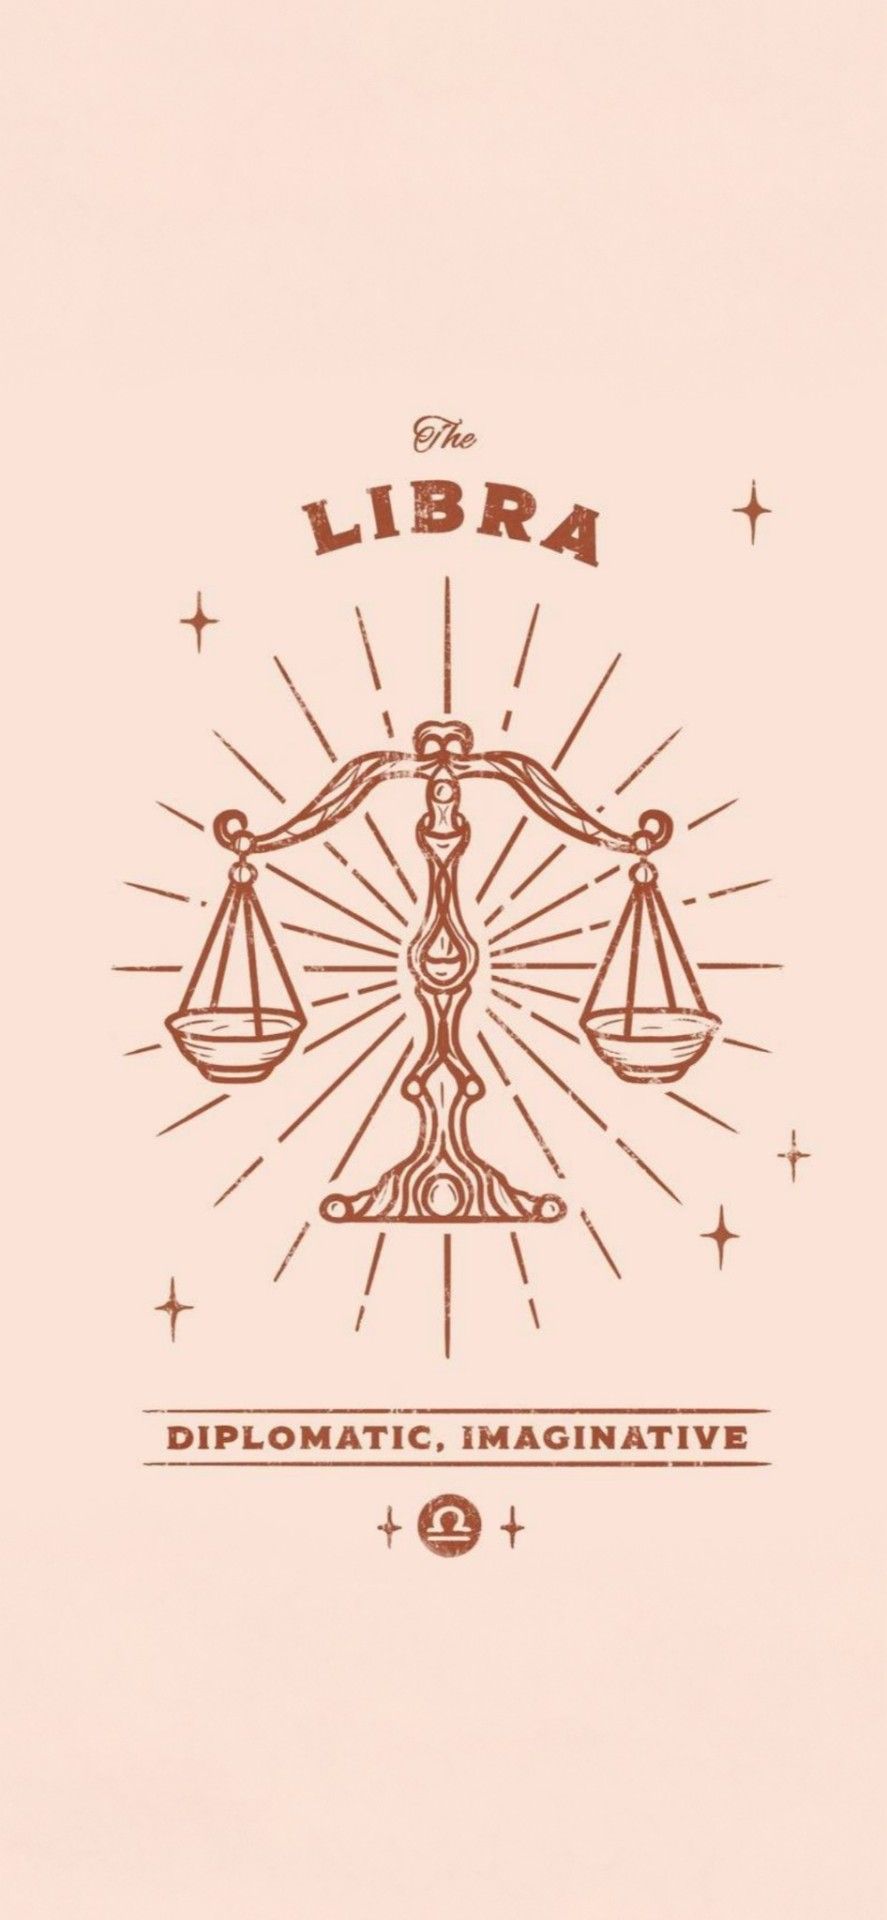 The libra zodiac sign is shown on a pink background - Libra